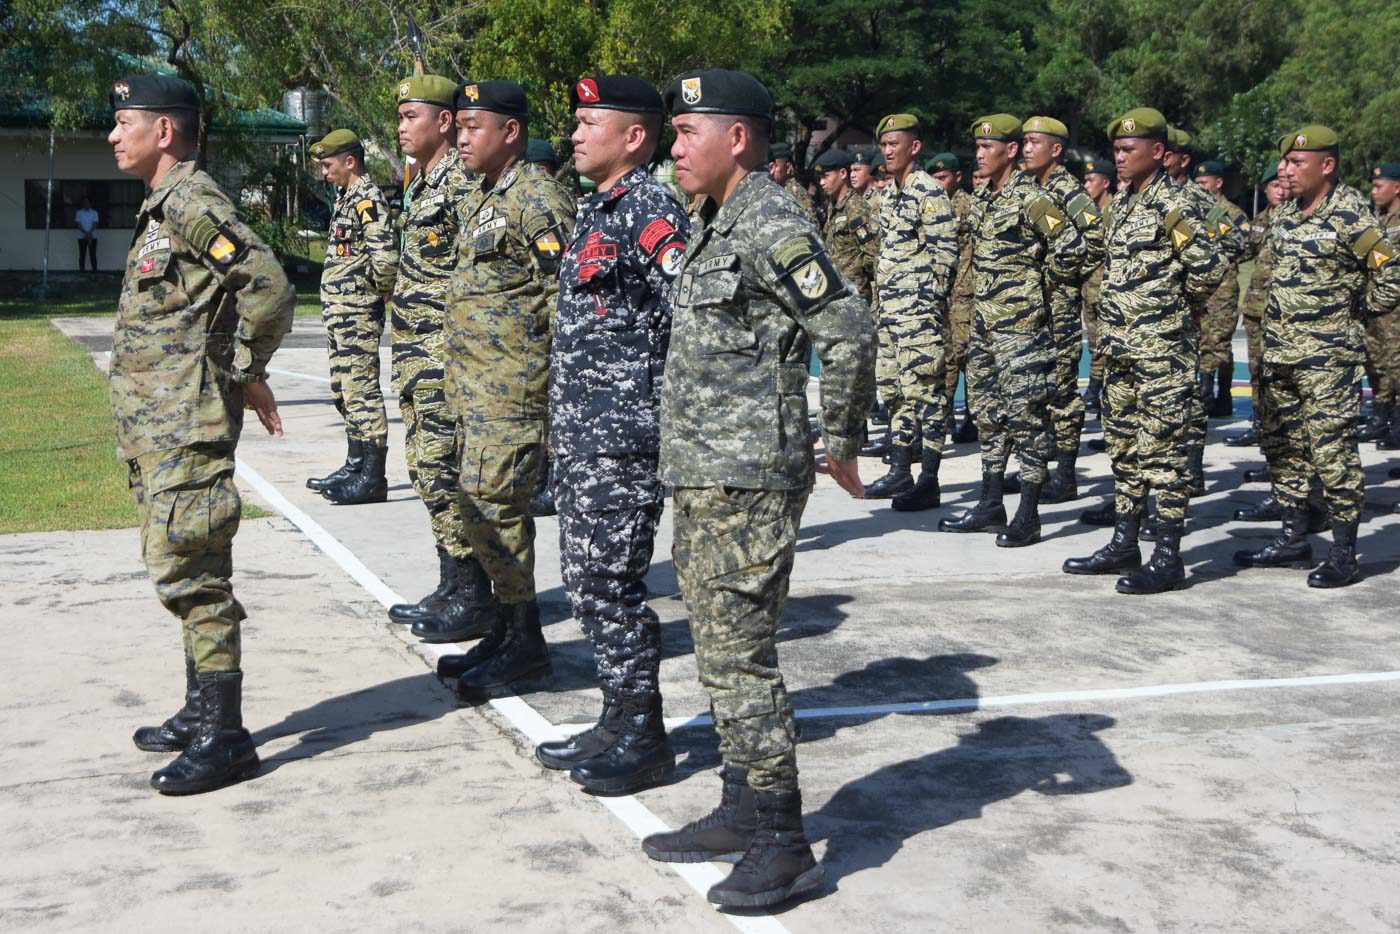 IN PHOTOS: Philippine Army's elite units have new commanders